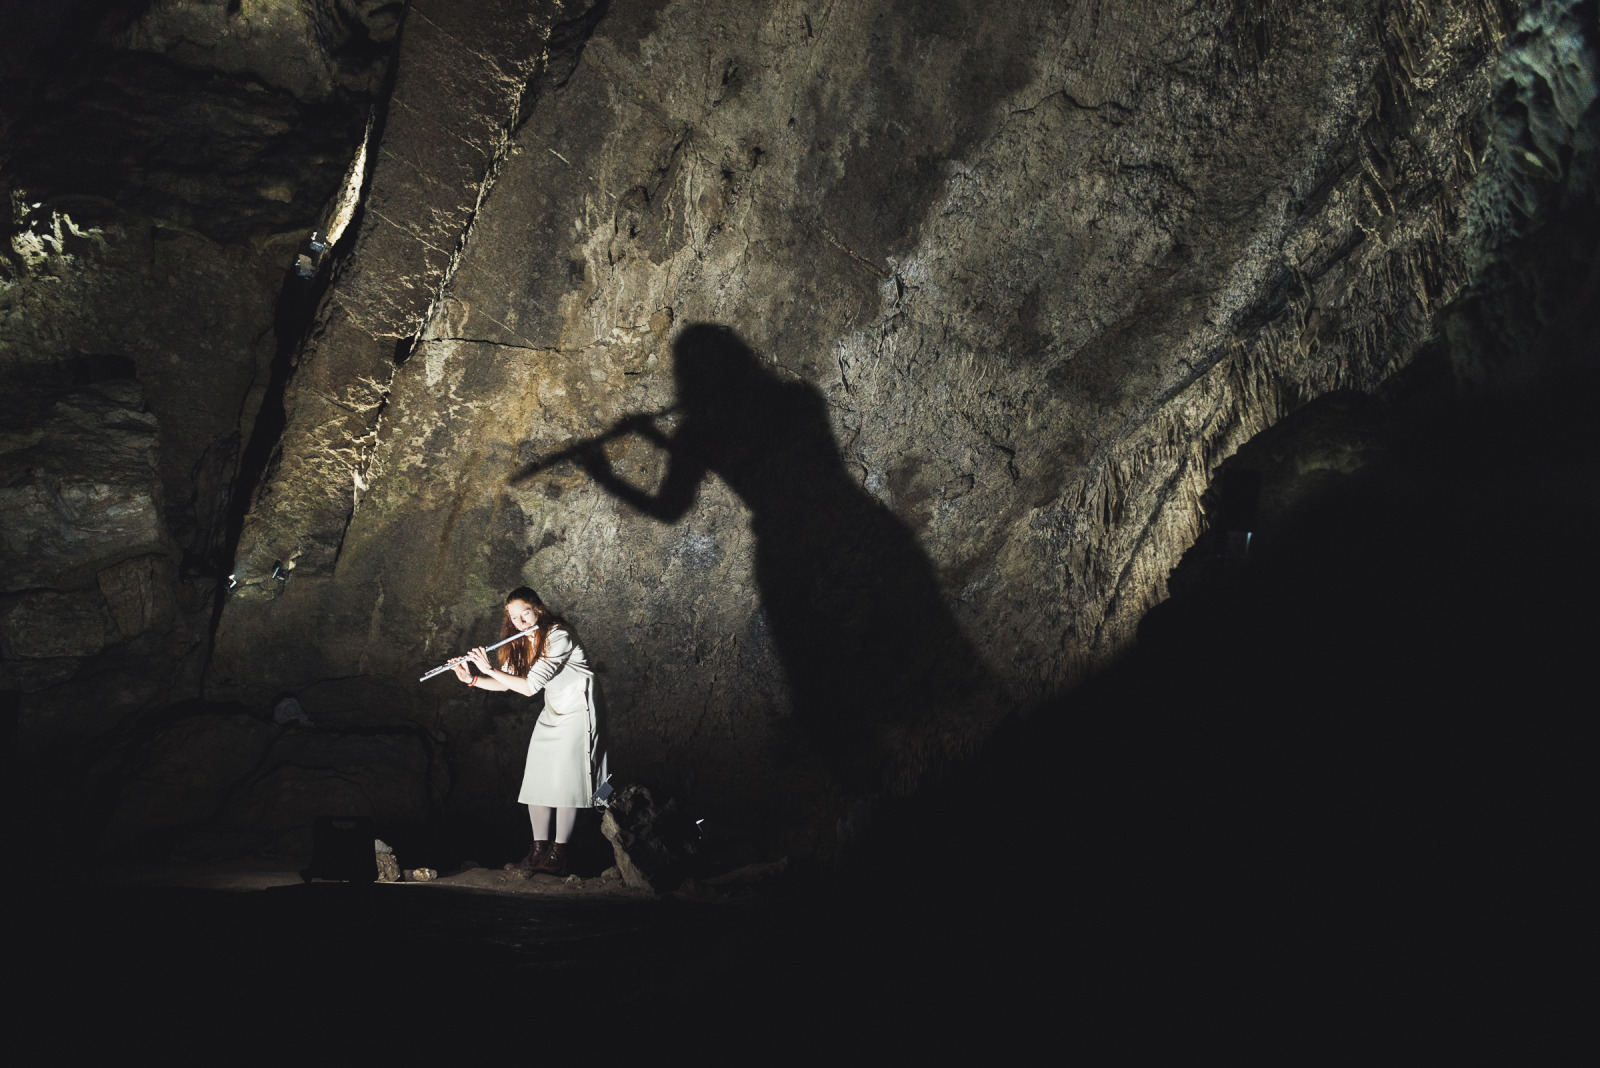 Musician playing his transverse flute in the caves of Han